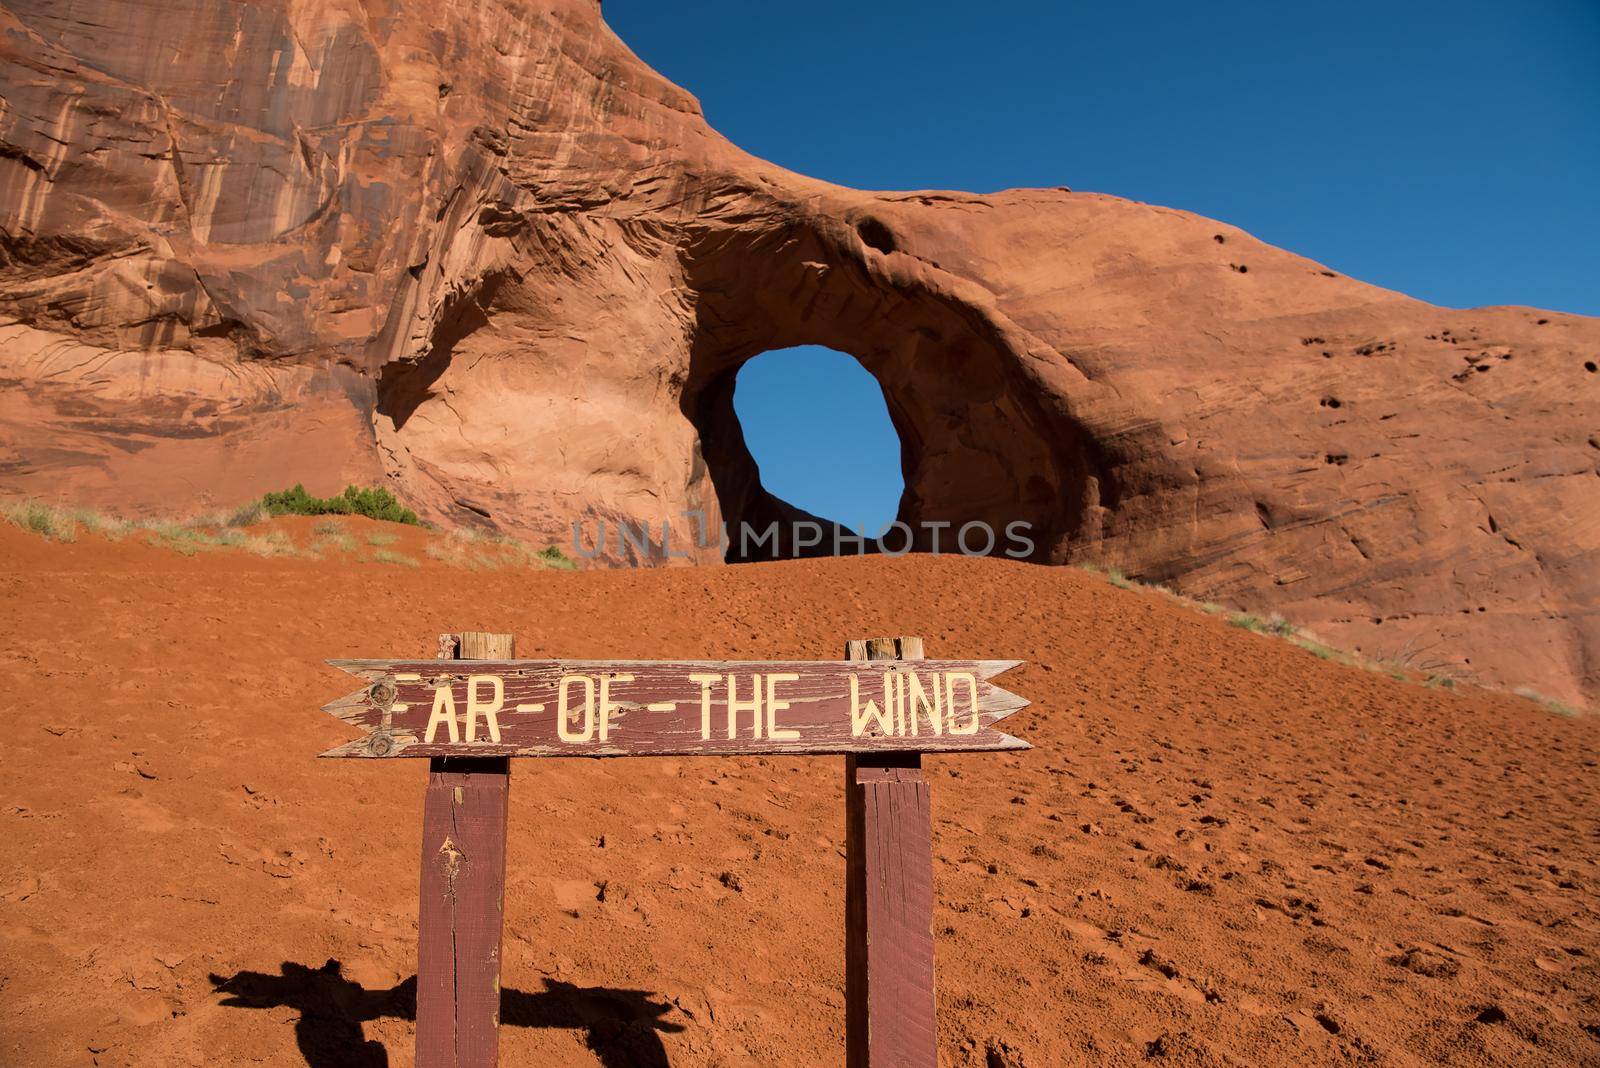 Giant sized hole in rock face at Ear-of-the-Wind arch